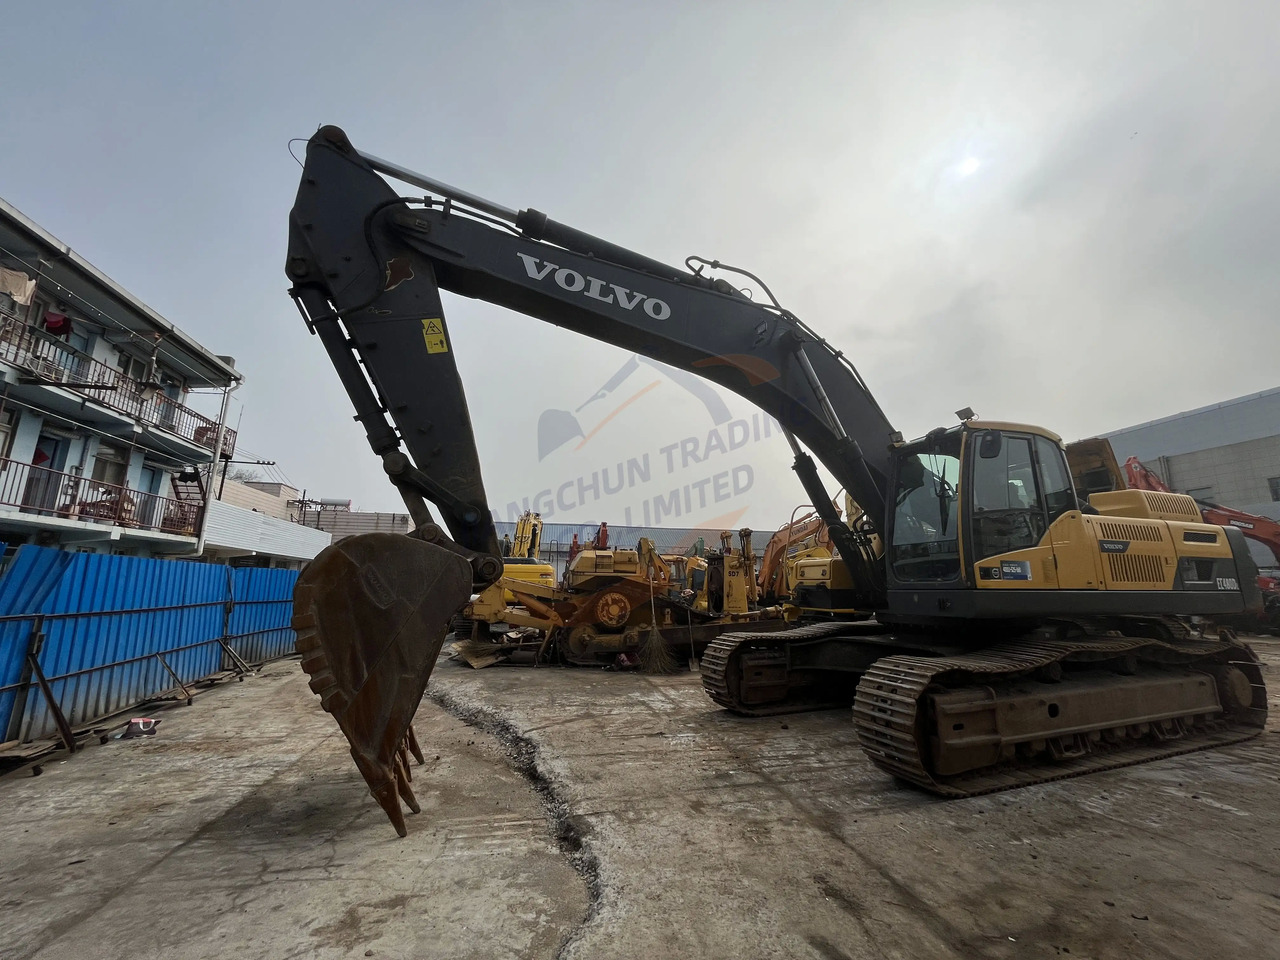 Pelle sur chenille New arrival second hand  hot selling Excavator construction machinery parts used excavator used  Volvo EC480D  in stock for sale: photos 5